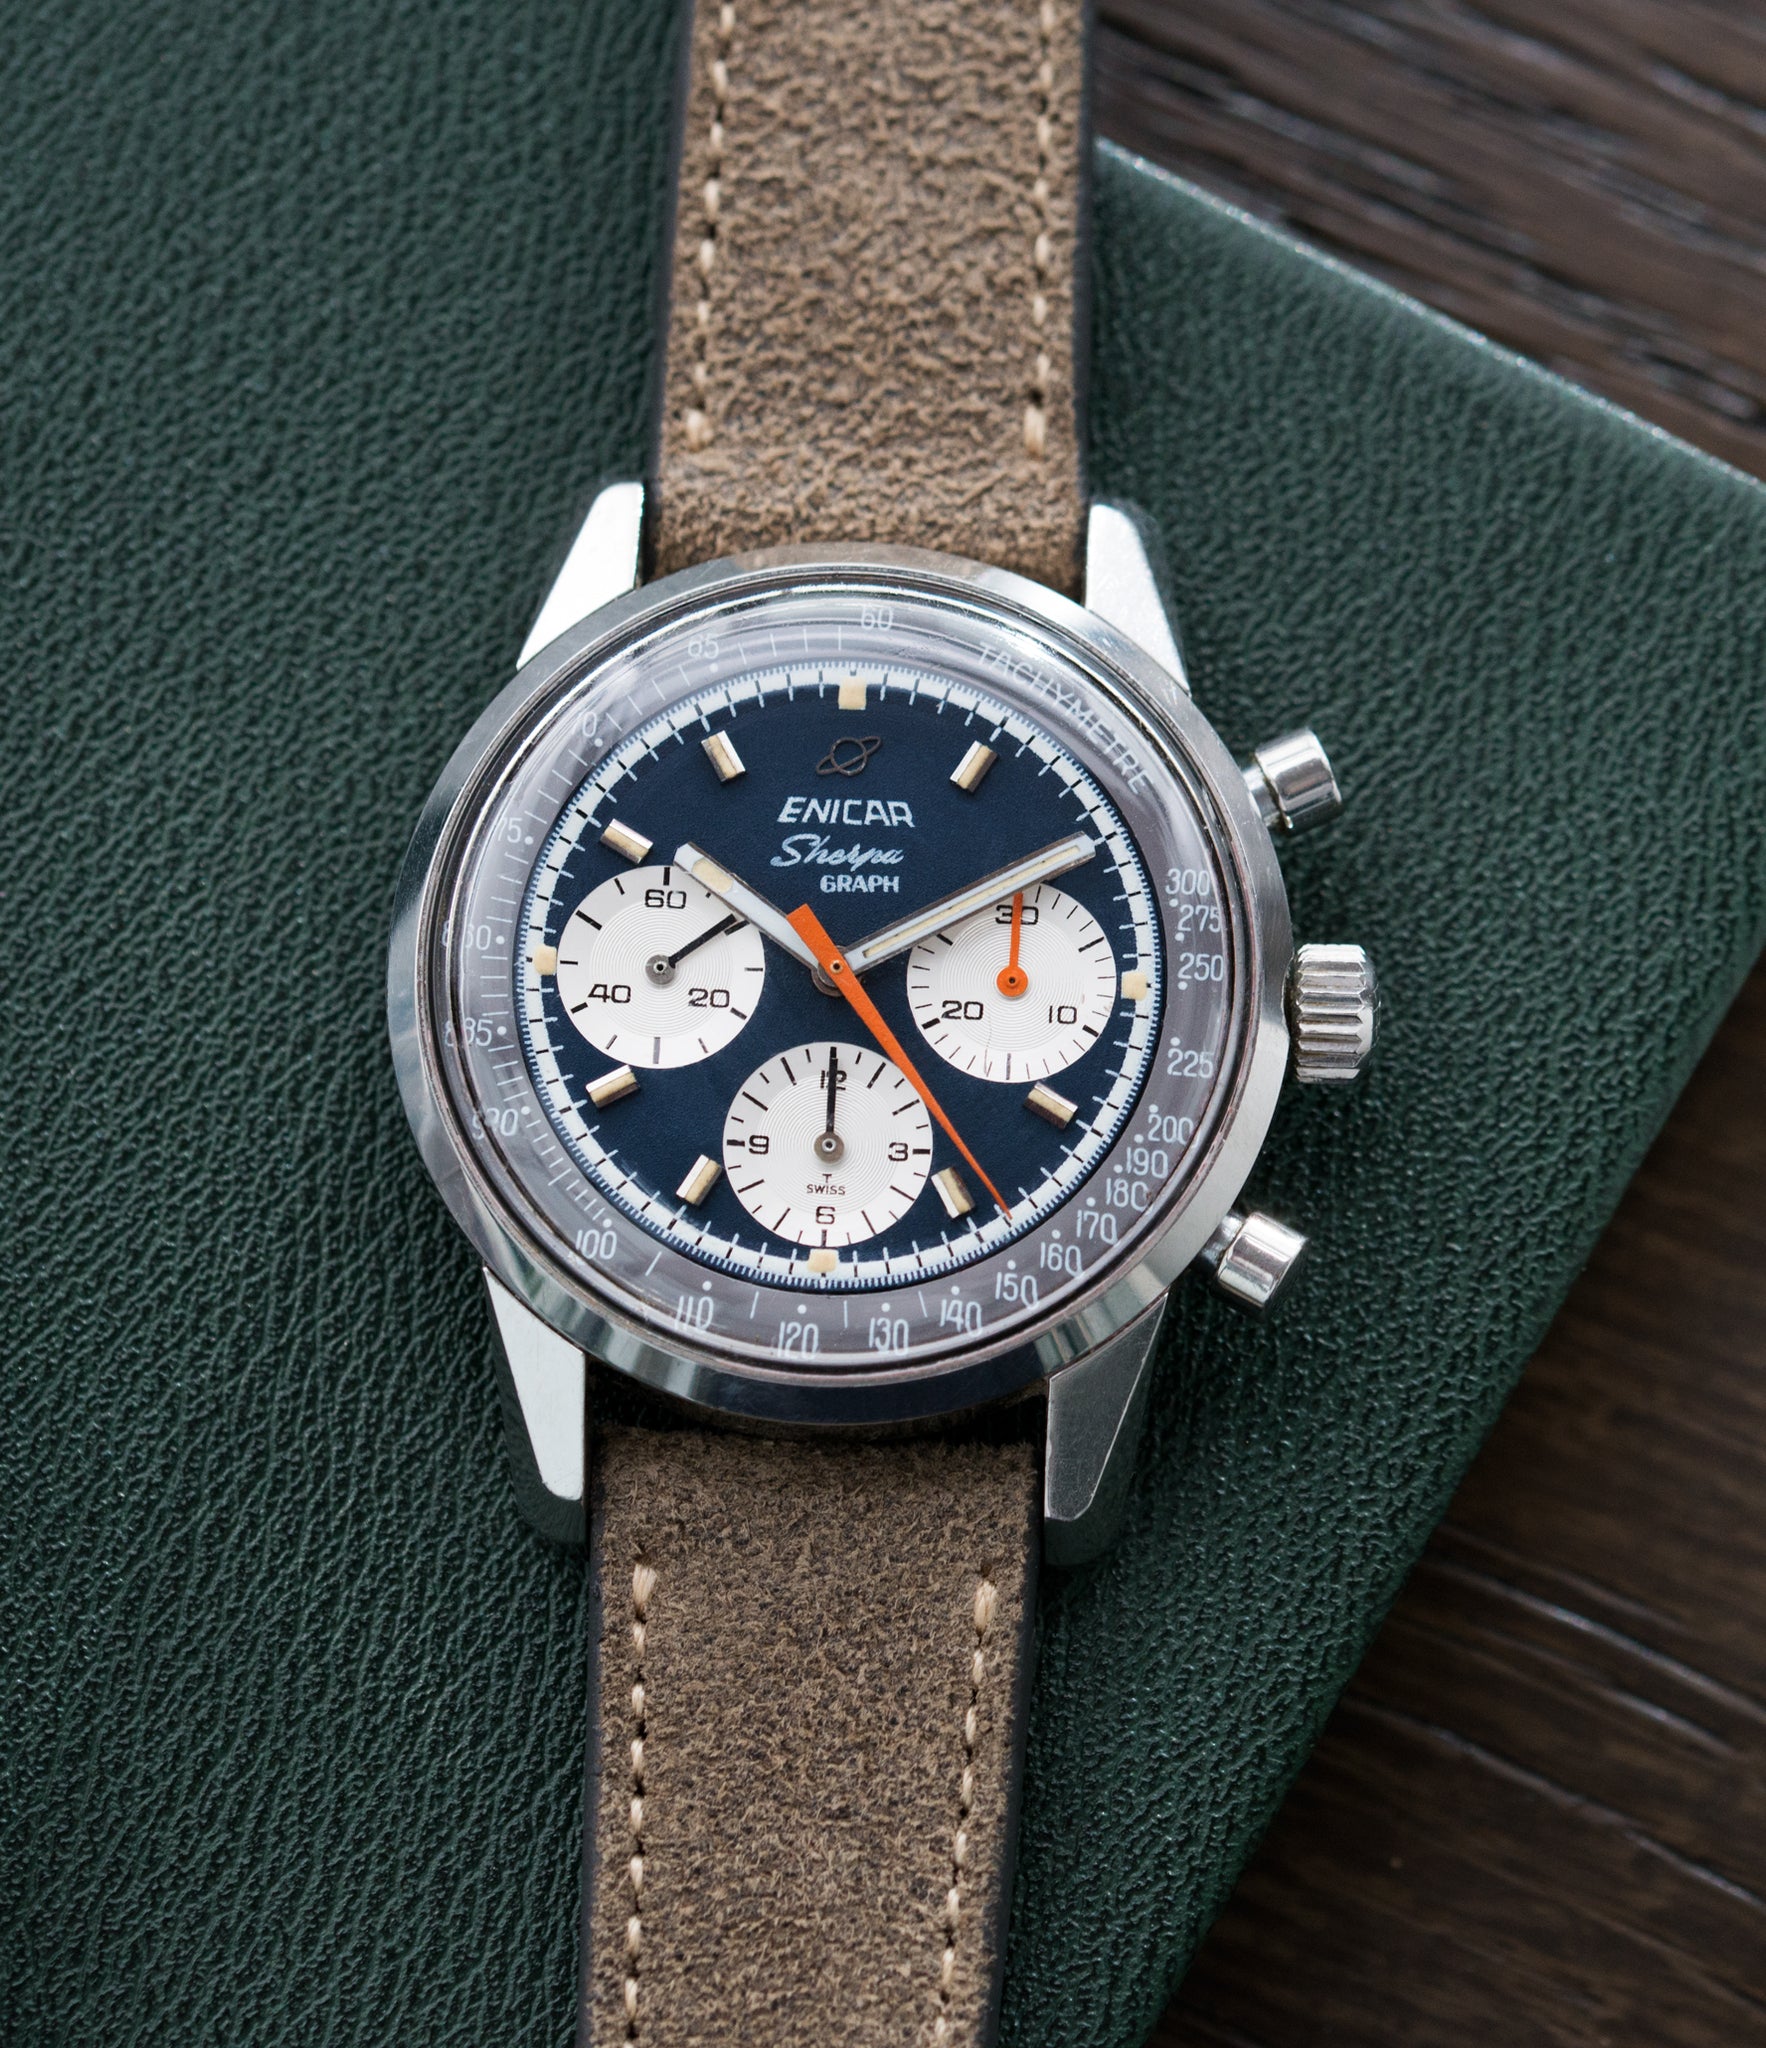 Jim Clark classic vintage sport watch Enicar Sherpa Graph 300 Ref. 072-02-01 steel chronograph sport racing watch for sale online at A Collected Man London UK vintage watch specialist